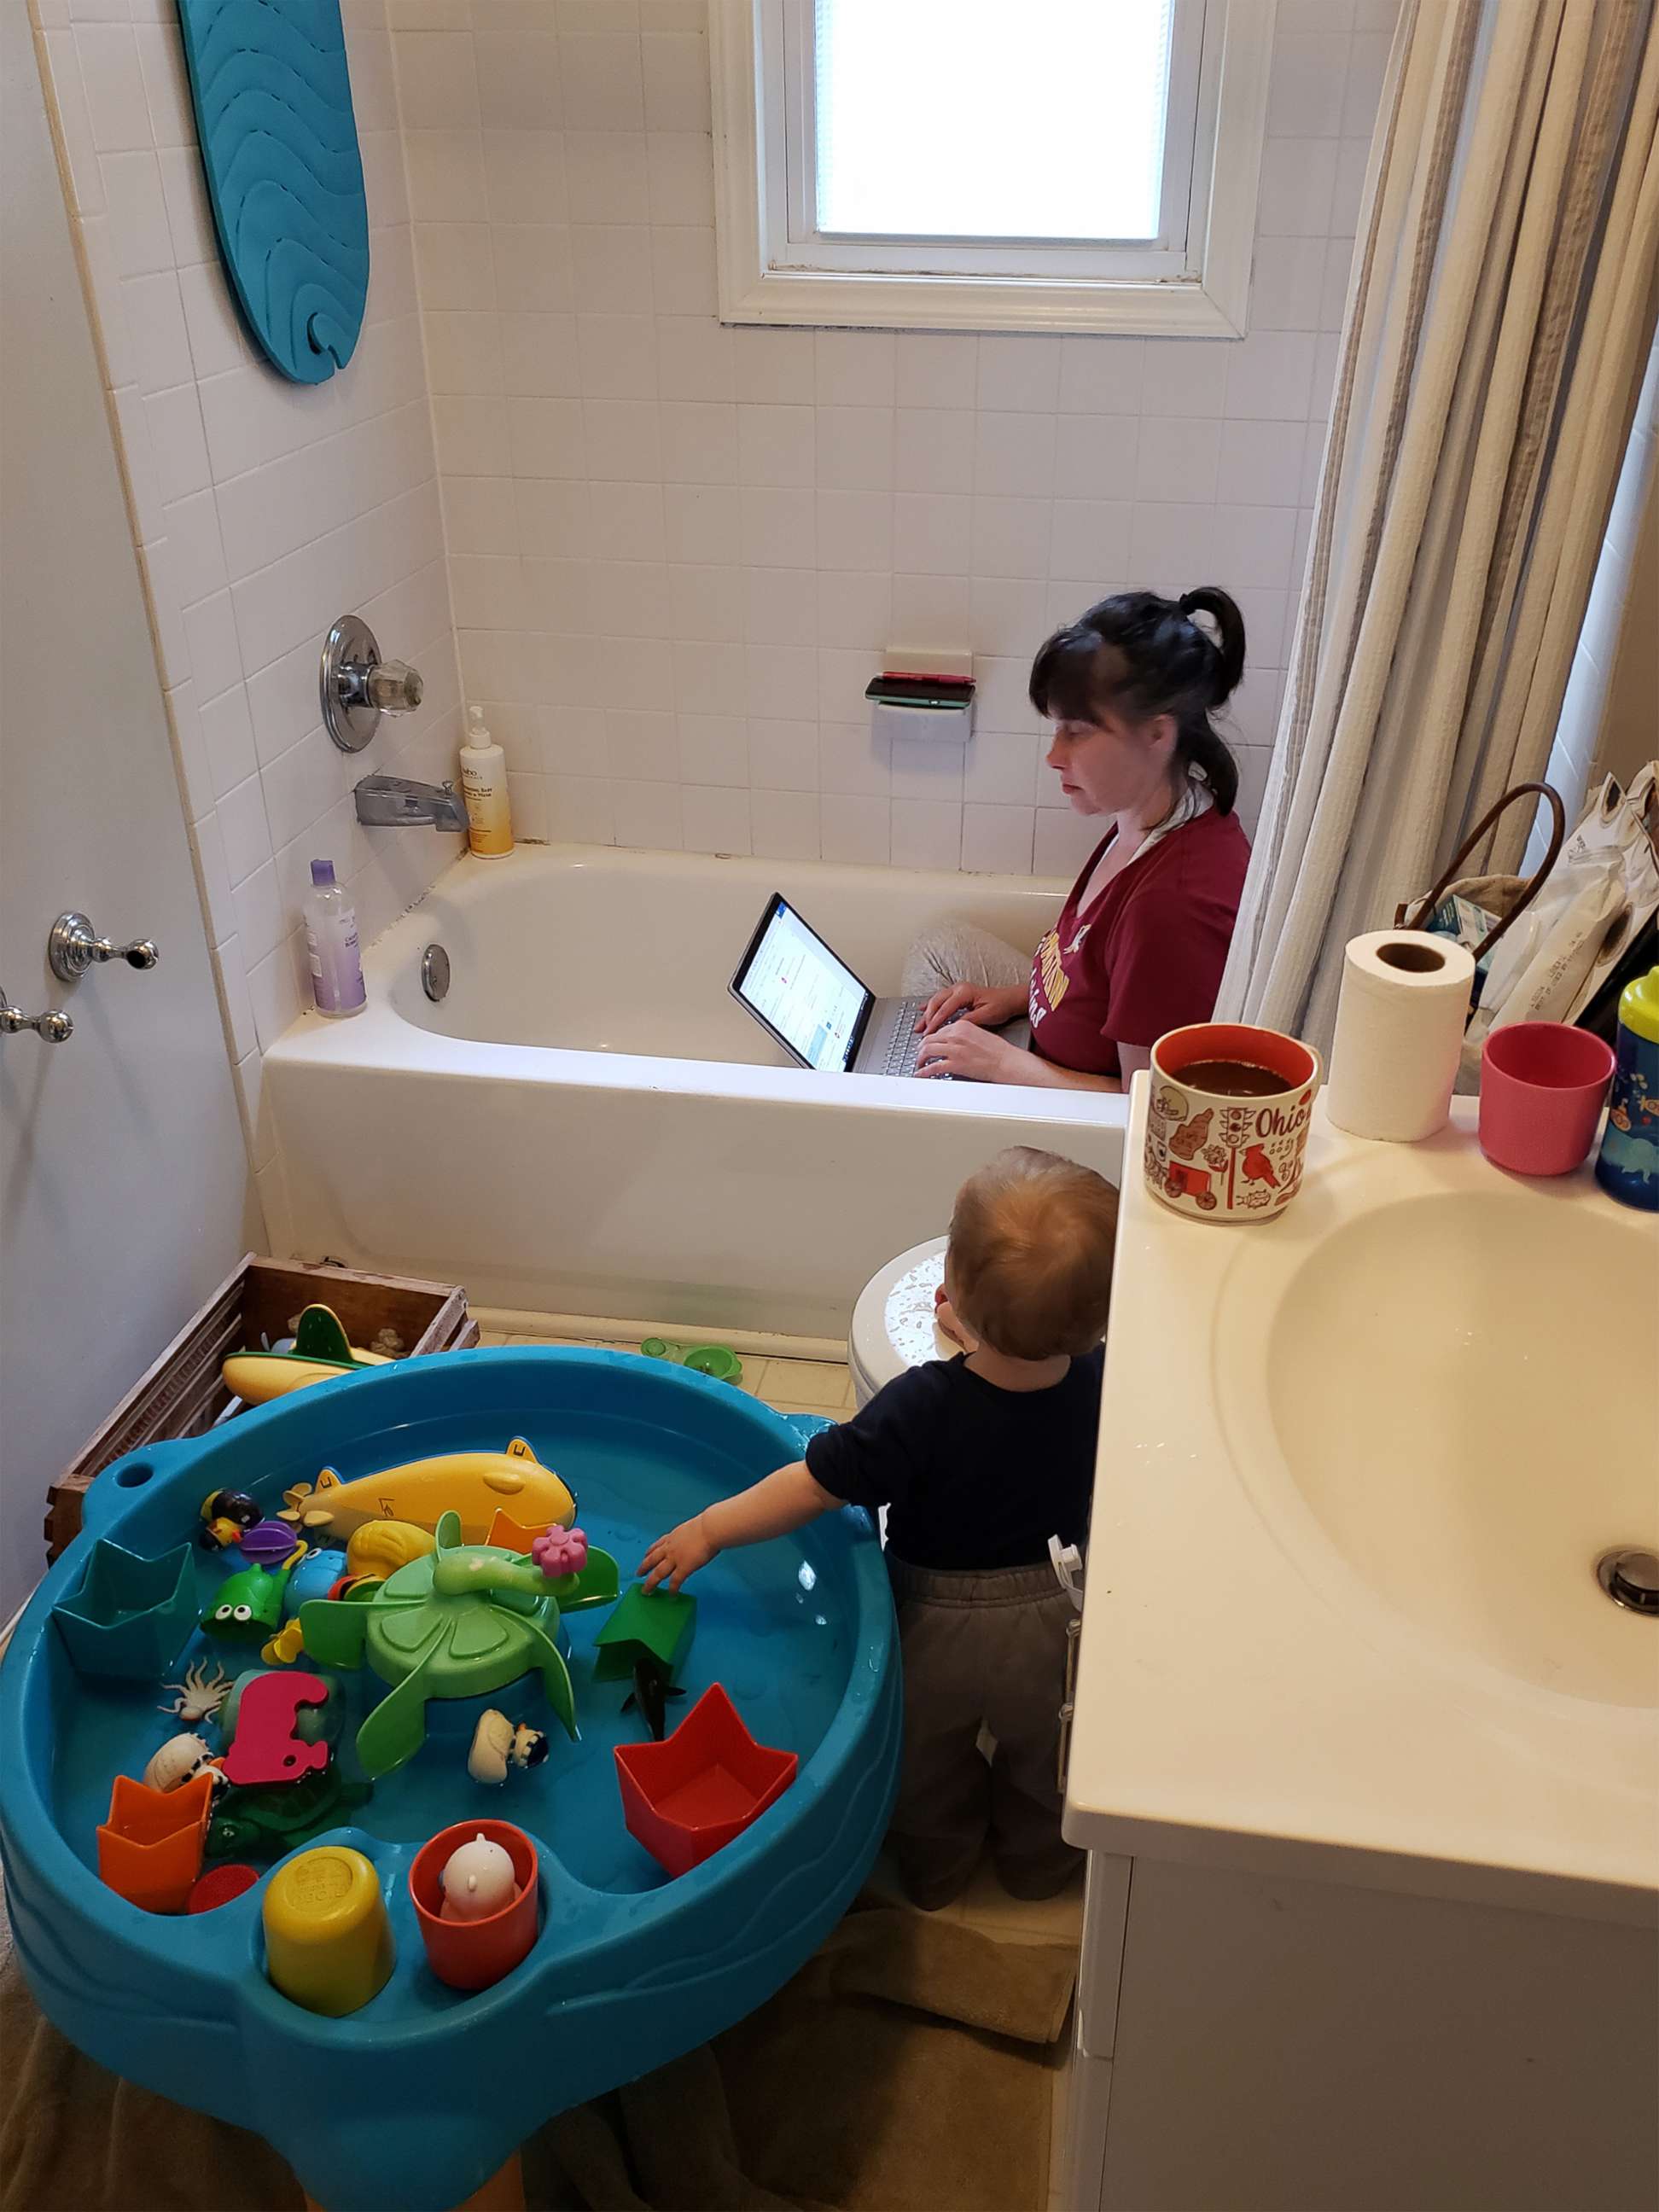 PHOTO: Heidi Lewis, a mother of two, is seen working from home in Silver Spring, Maryland, amidst in-person child care and school closures, April 2020. Her 1-year-old daughter Harriet is seen playing beside her in the bathroom.